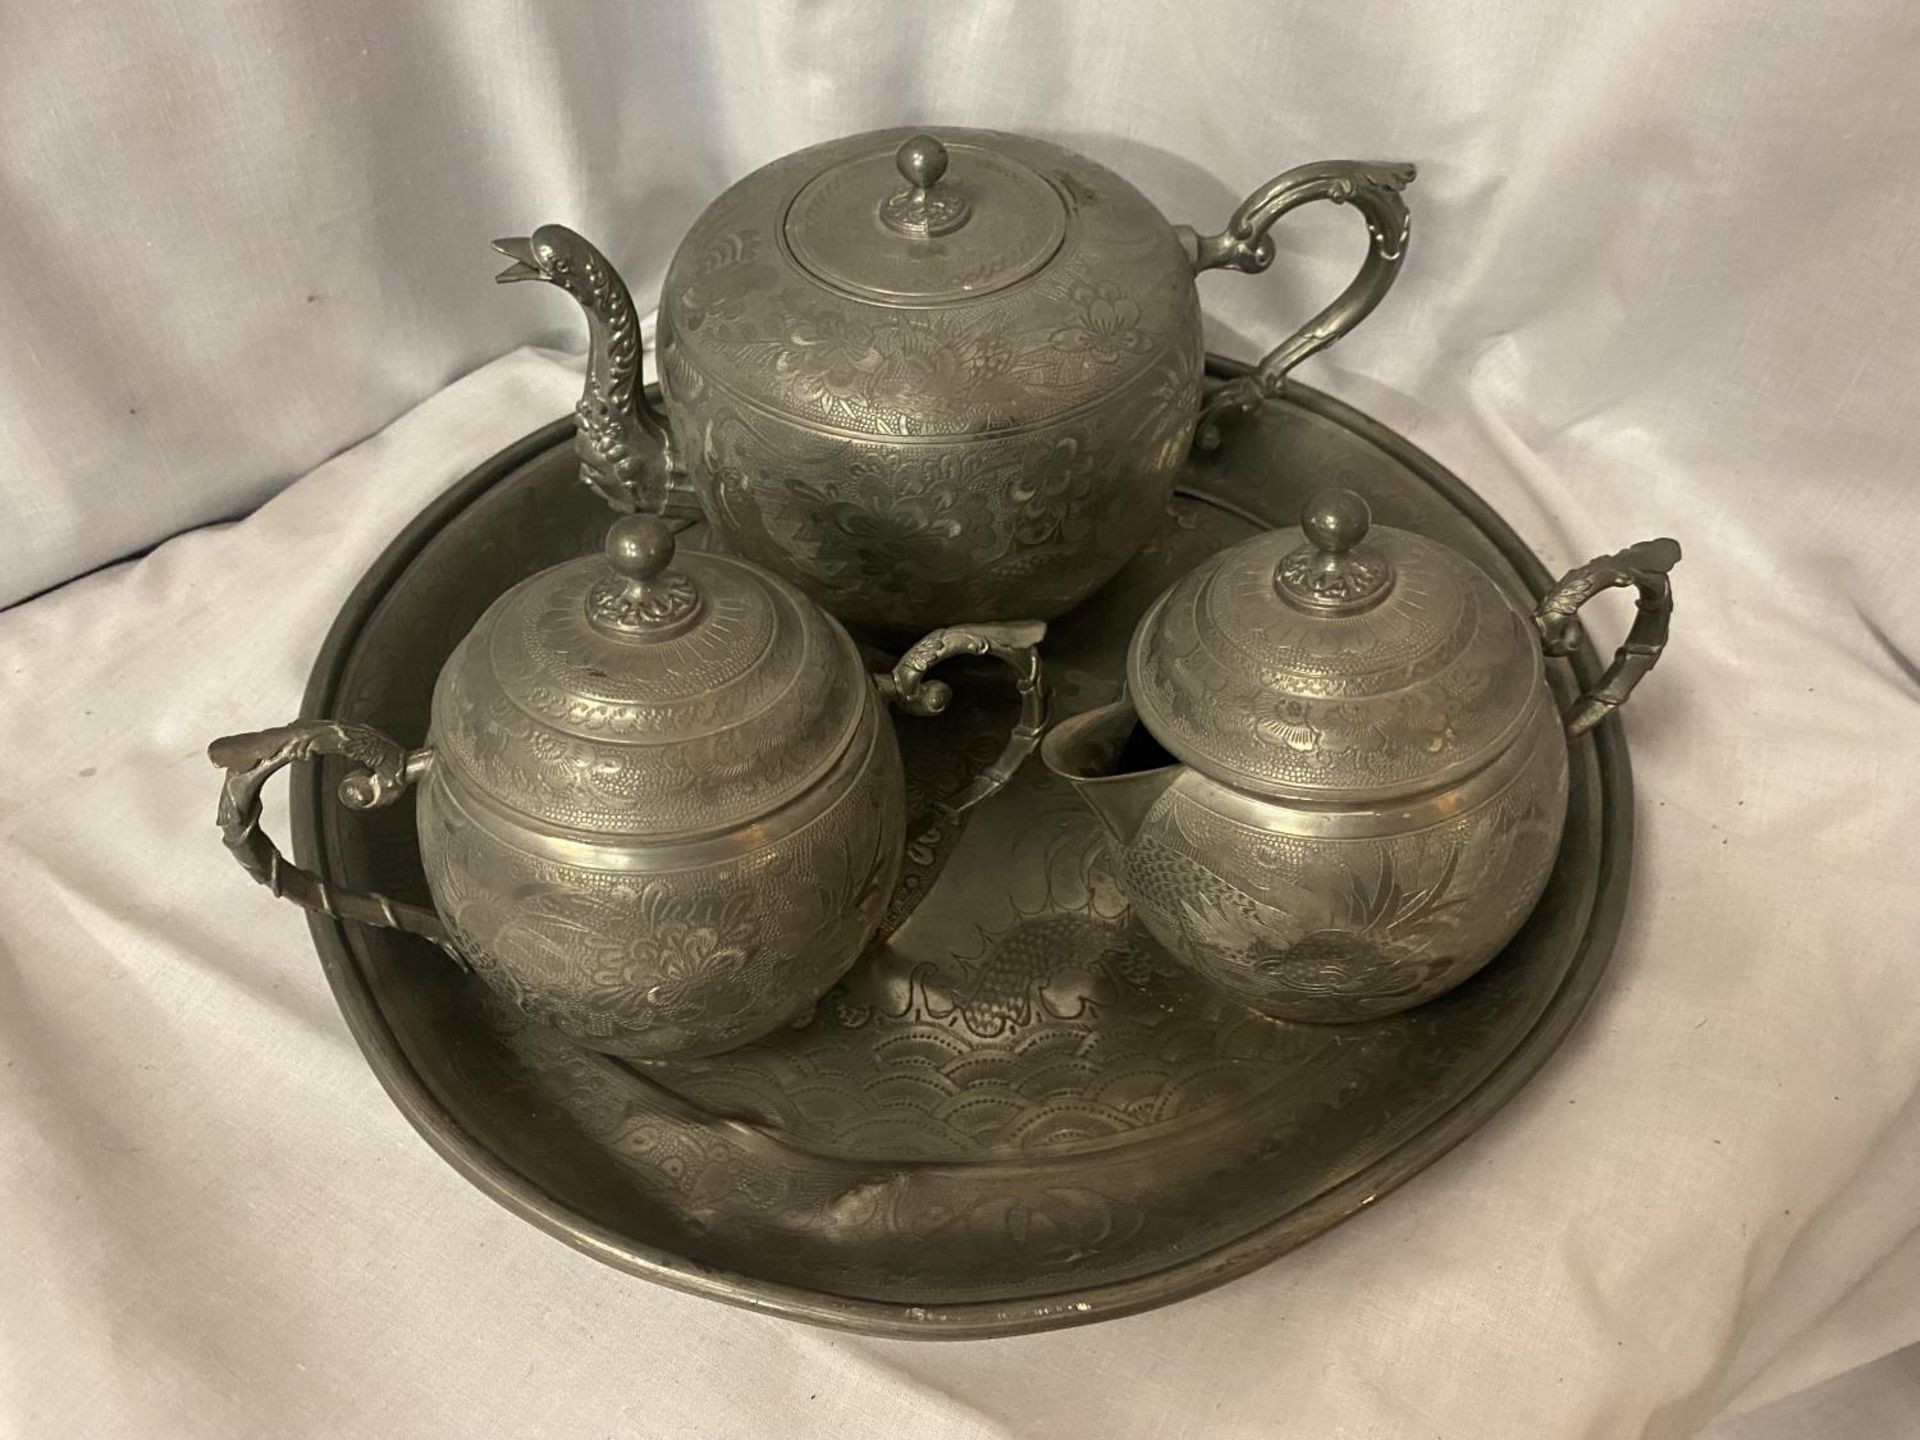 A FOUR PIECE ANTIQUE CHINESE HUIKEE SWATOW TEASET. PRODUCED FROM THE MID 1800'S TO THE TURN OF THE